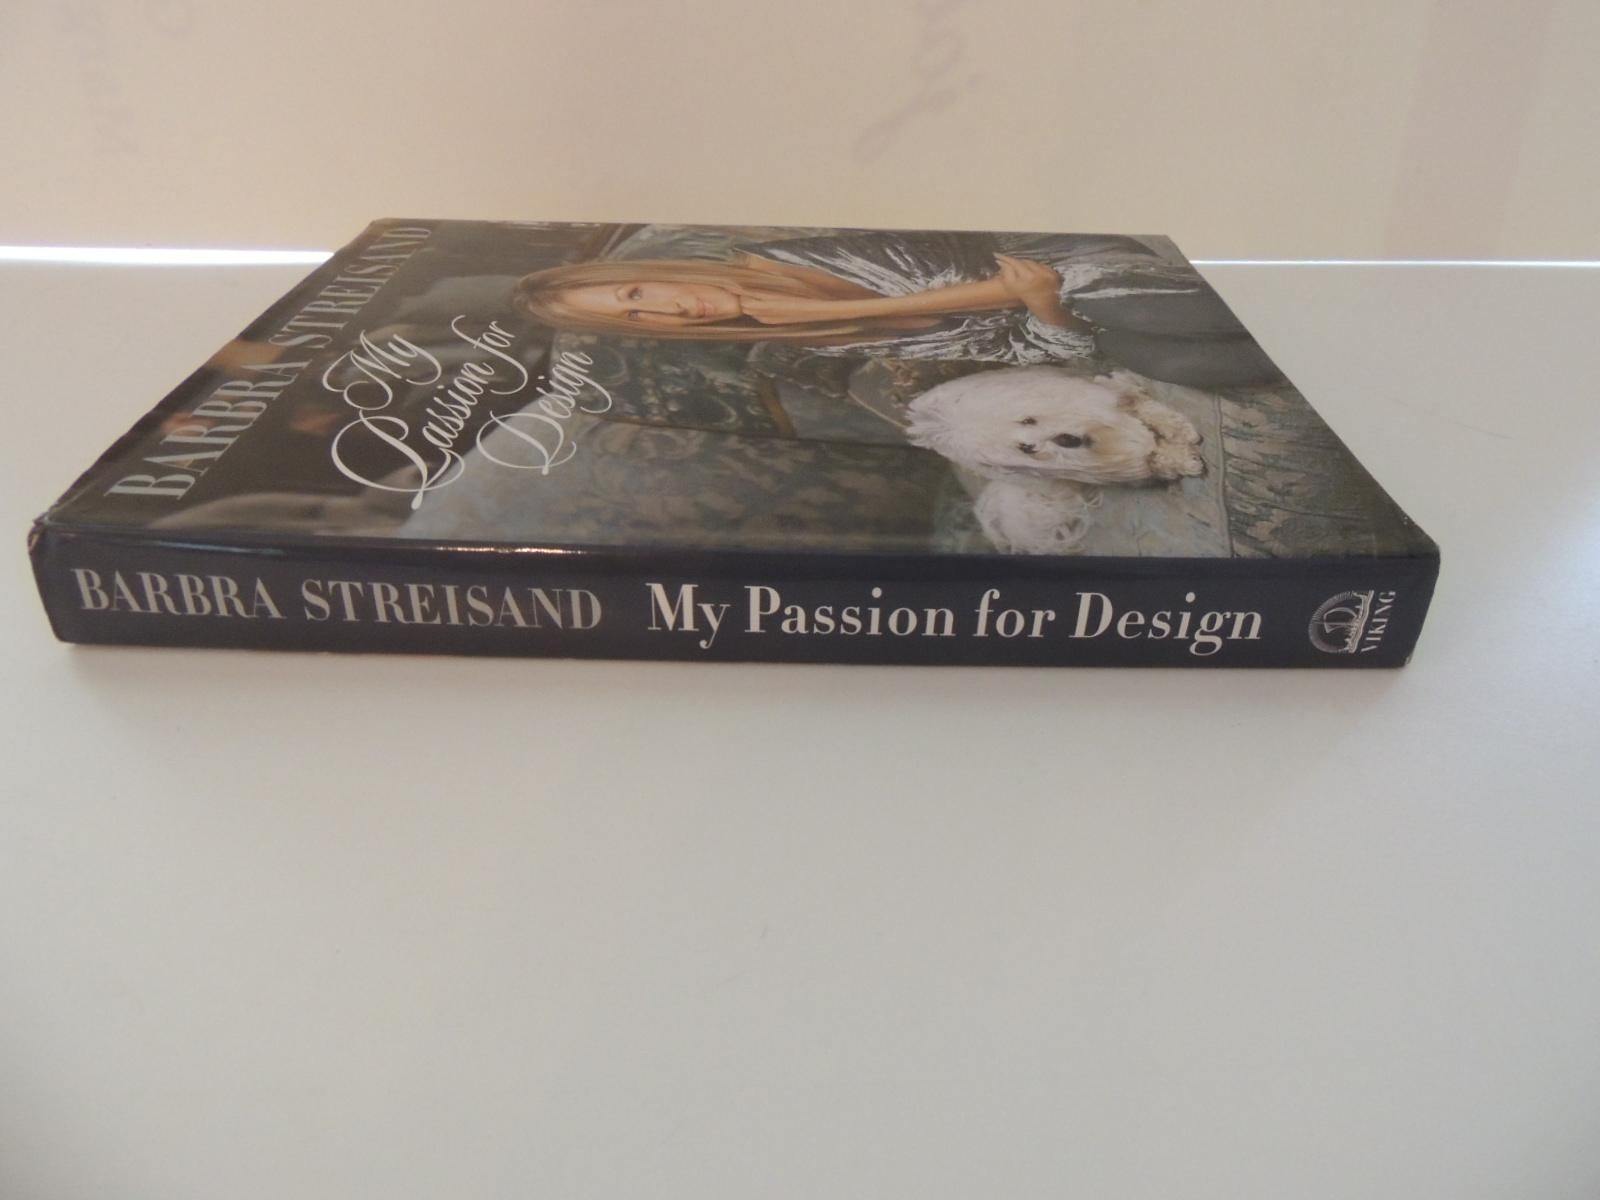 Barbara Streisand My Passion for design decorating hardcover coffee table book.
Publisher: Viking; 1st edition (November 16, 2010)
Language: English
Hardcover: 295 pages
Dimensions: 9.38 x 1.1 x 12.19 inches.
 